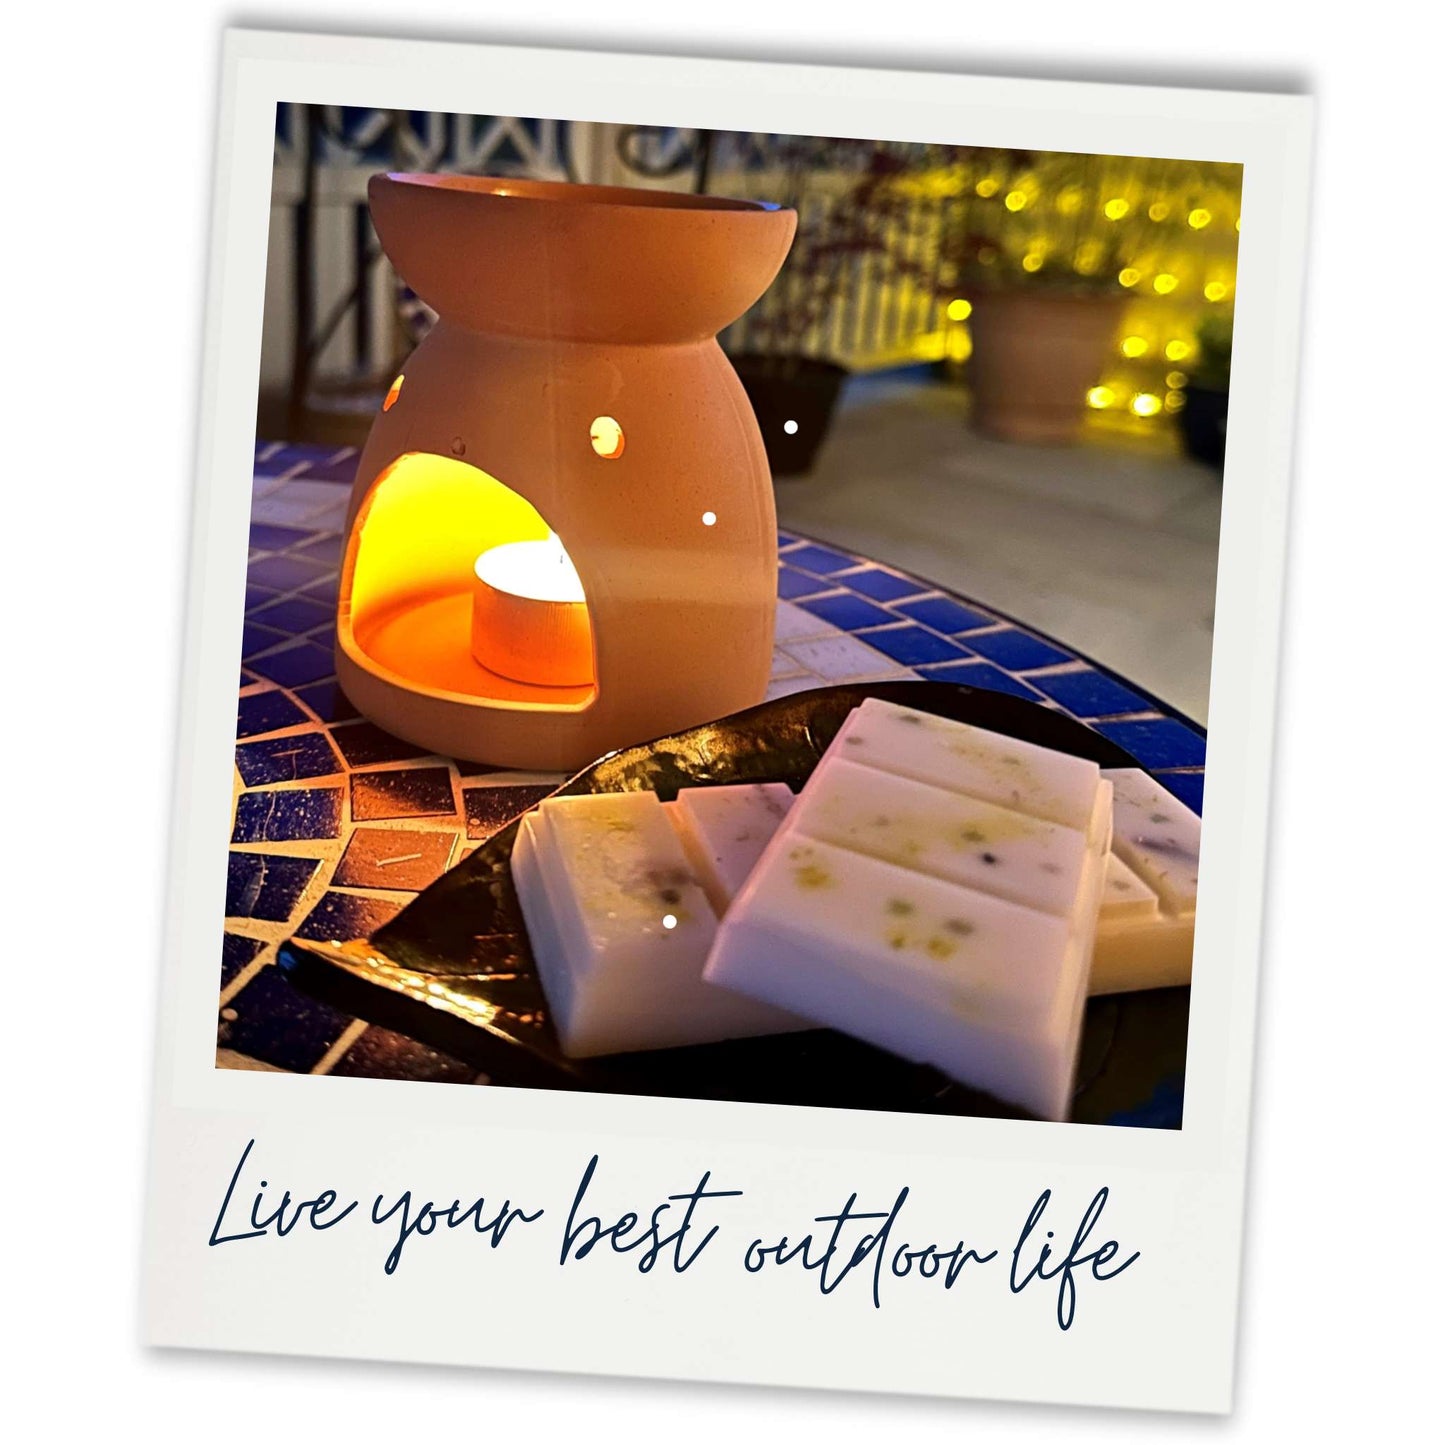 Citronella and Lemongrass insect repelling luxury wax melt set featuring two wax melts snap bars, a Terracotta wax warmer and a pack of Citronella incense sticks.